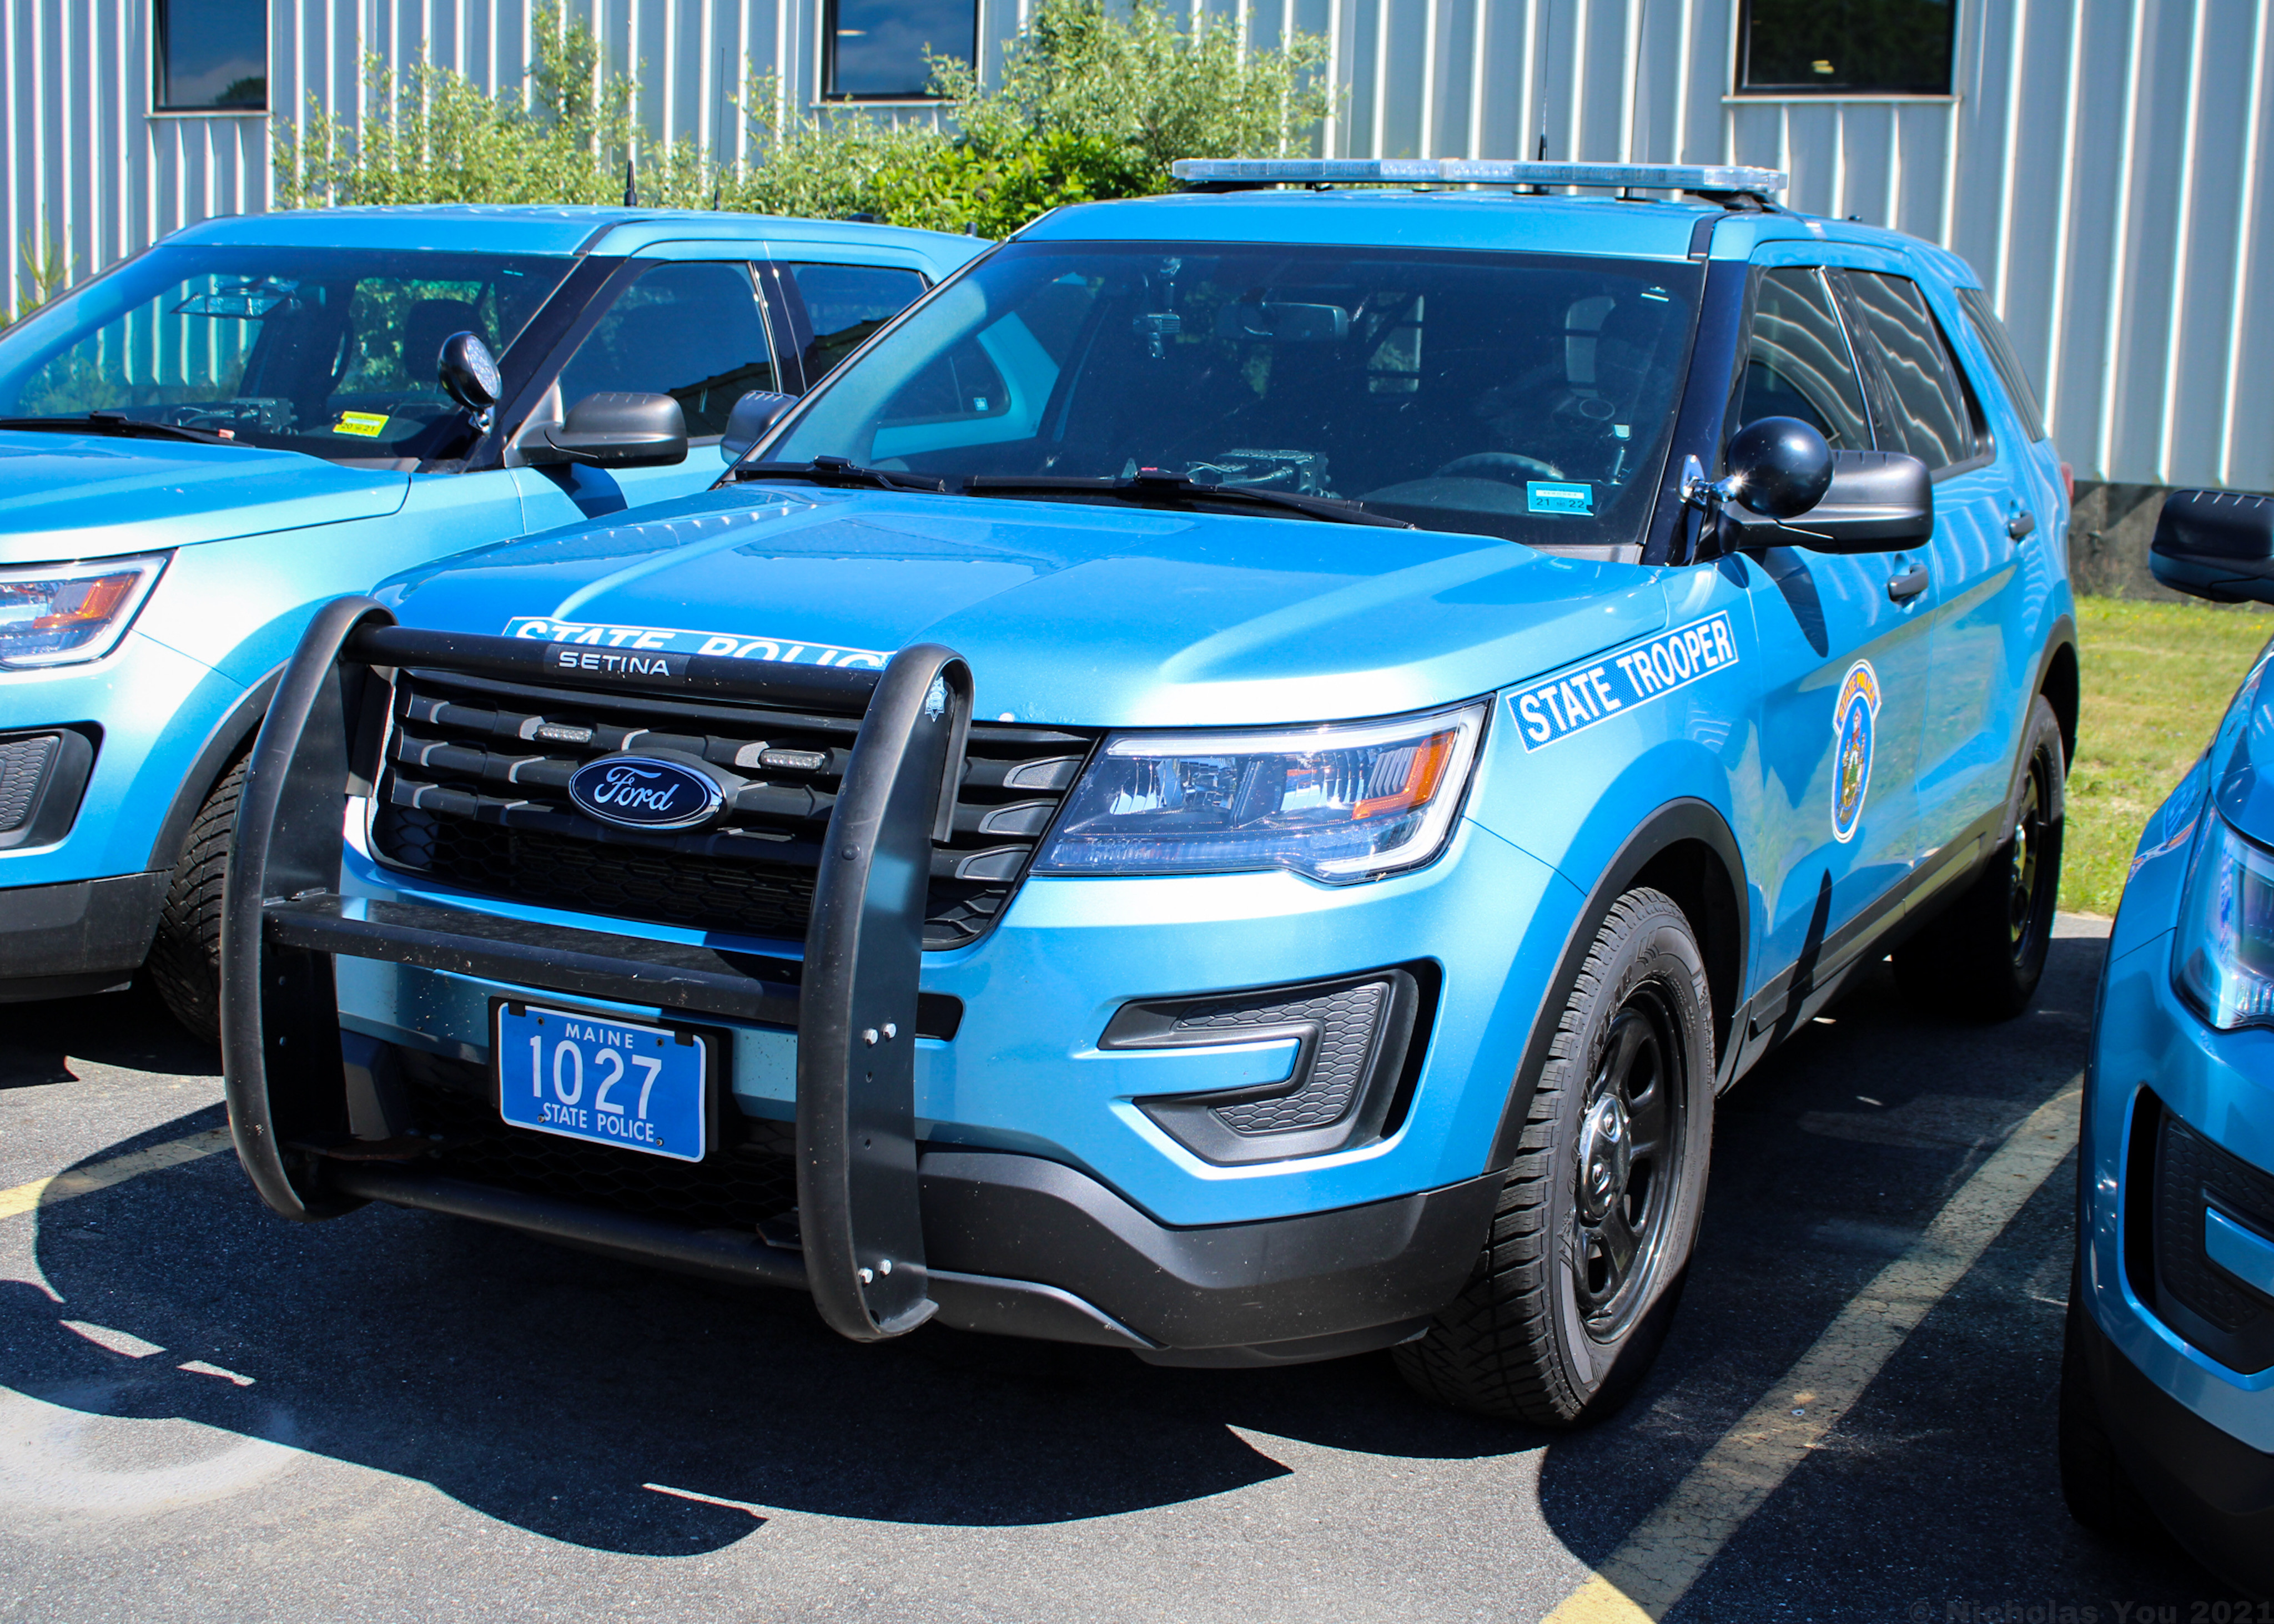 A photo  of Maine State Police
            Cruiser 1027, a 2016-2019 Ford Police Interceptor Utility             taken by Nicholas You